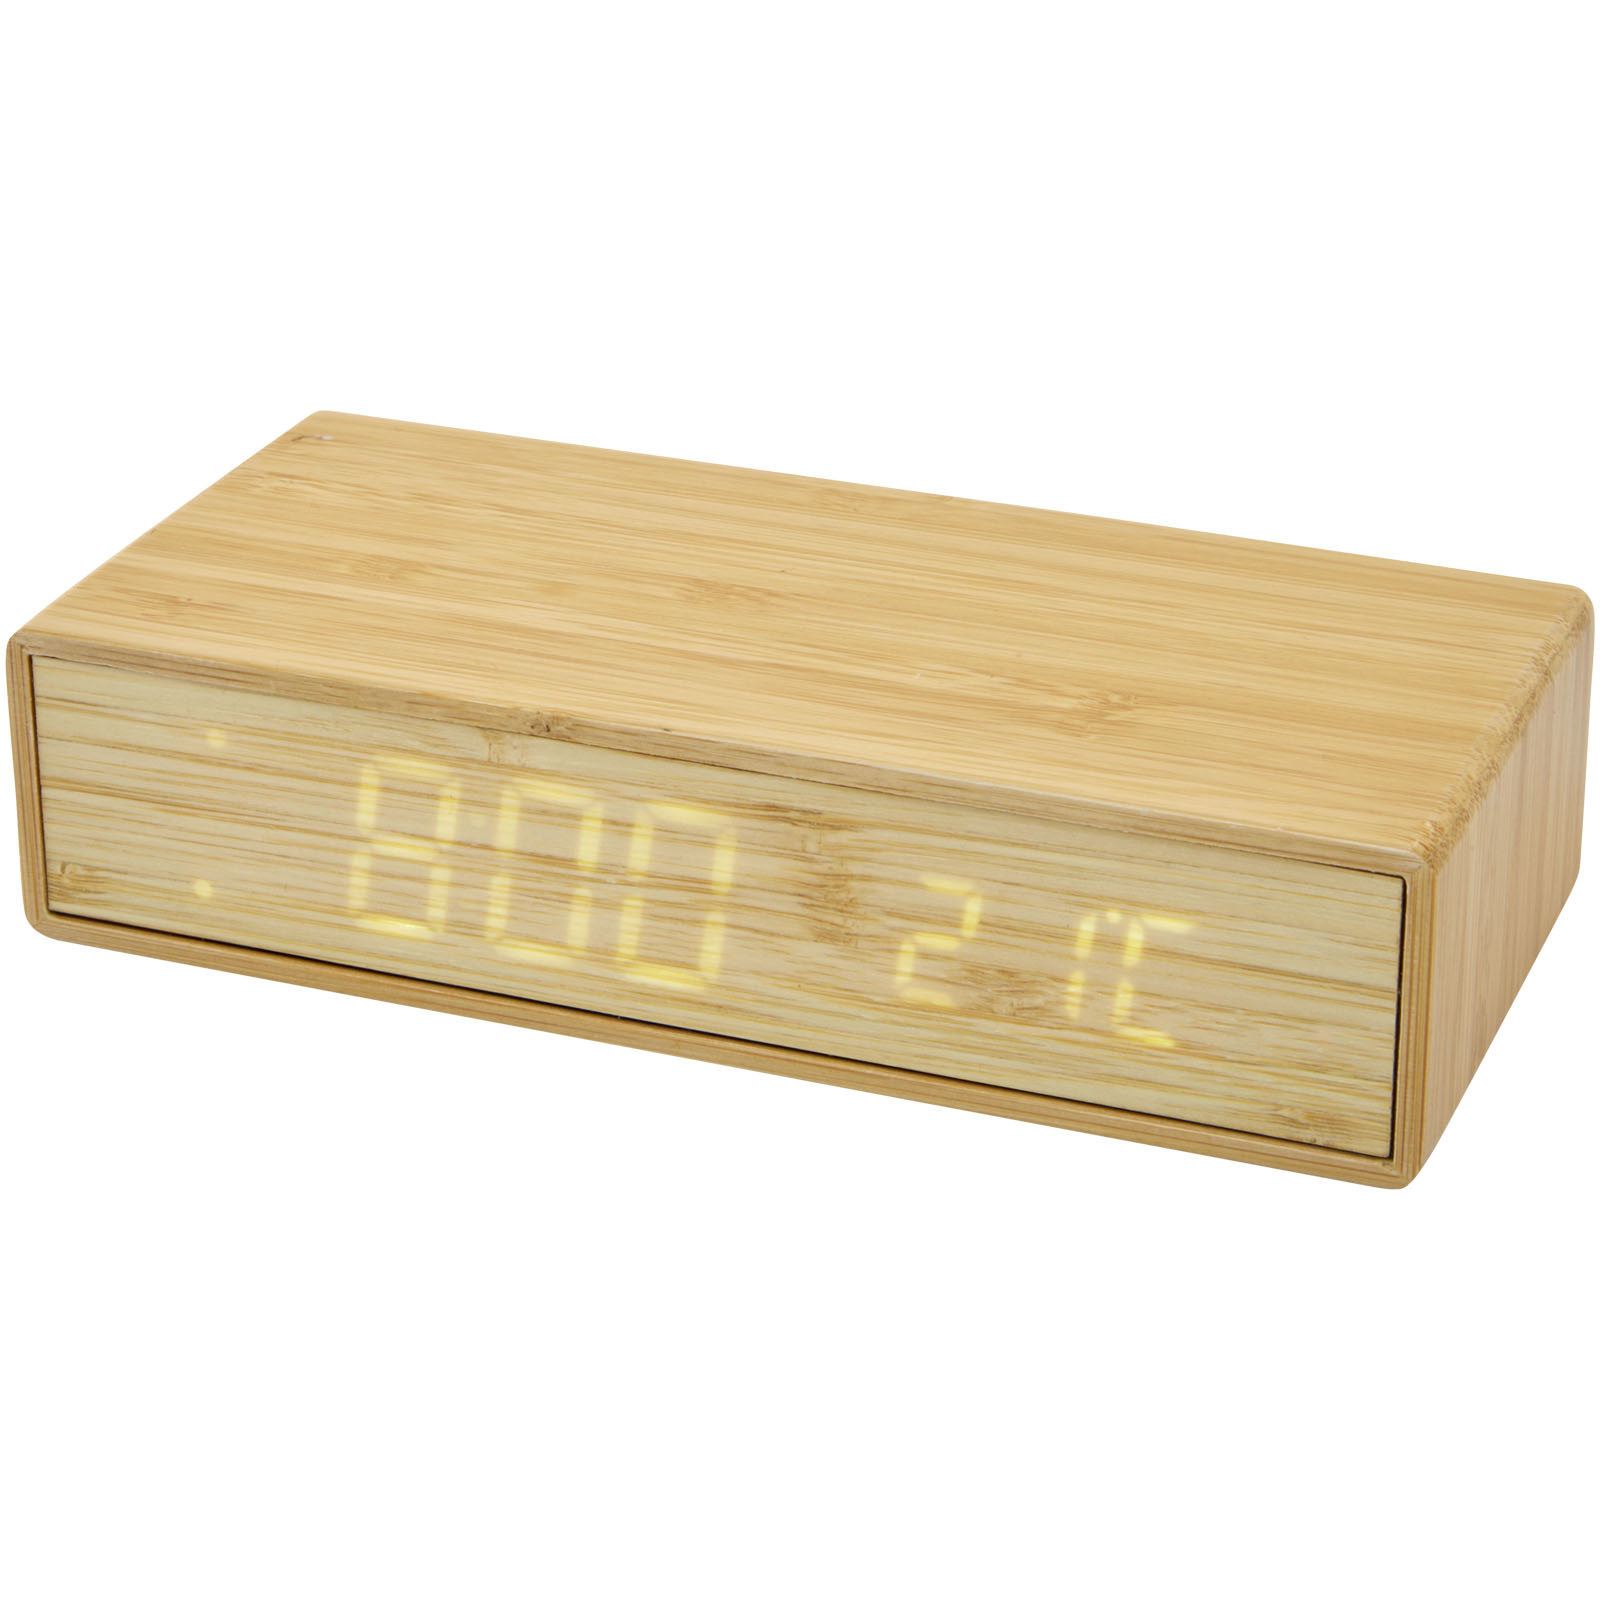 Bamboo desk clock ALERT with wireless charger - beige